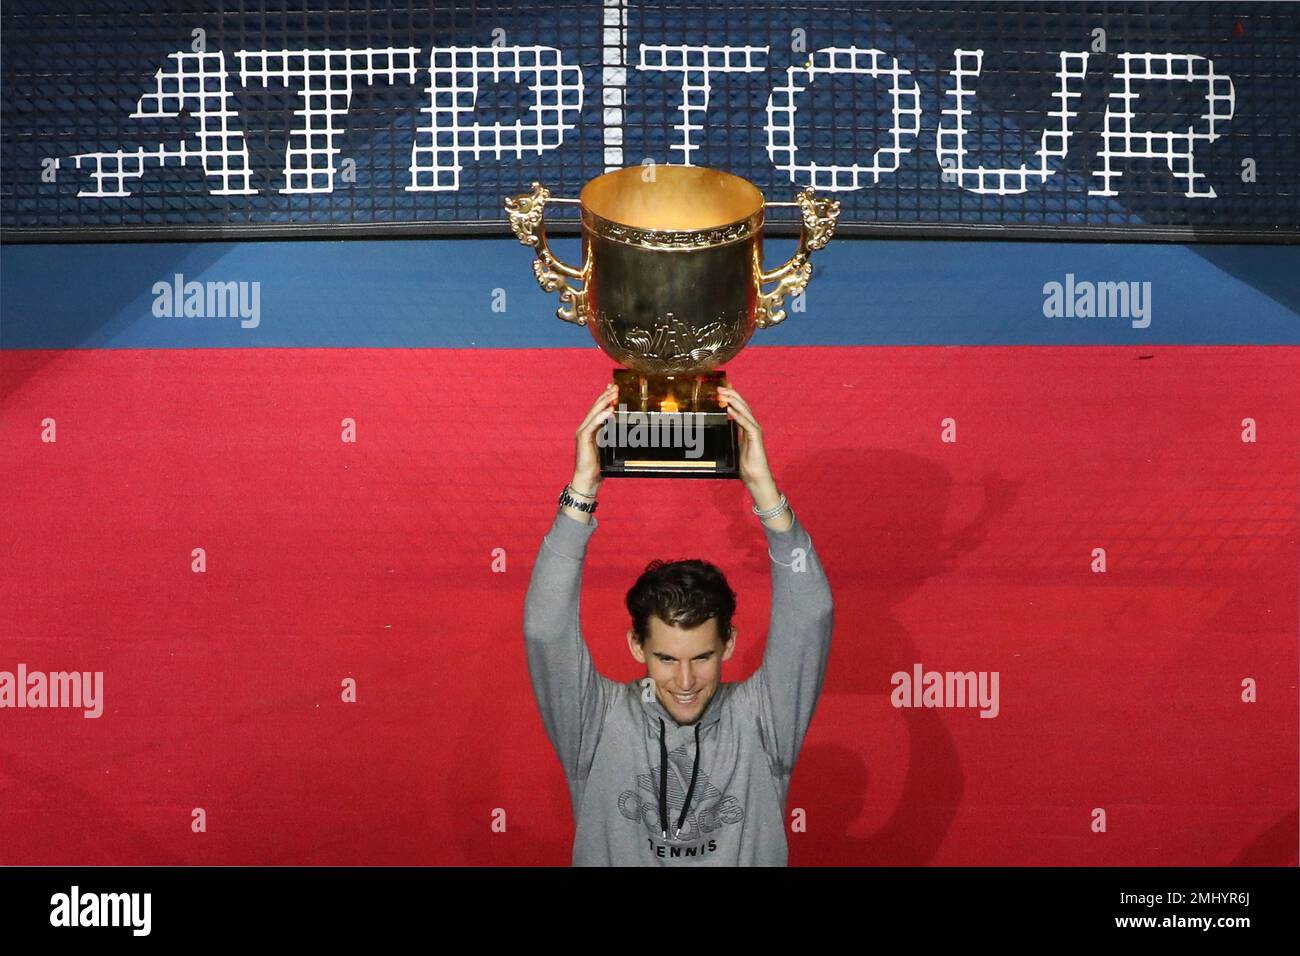 Dominic Thiem of Austria lifts-up the trophy after defeating Stefanos  Tsitsipas of Greece during the men's final at the China Open tennis  tournament in Beijing, Sunday, Oct. 6, 2019. (AP Photo/Ng Han